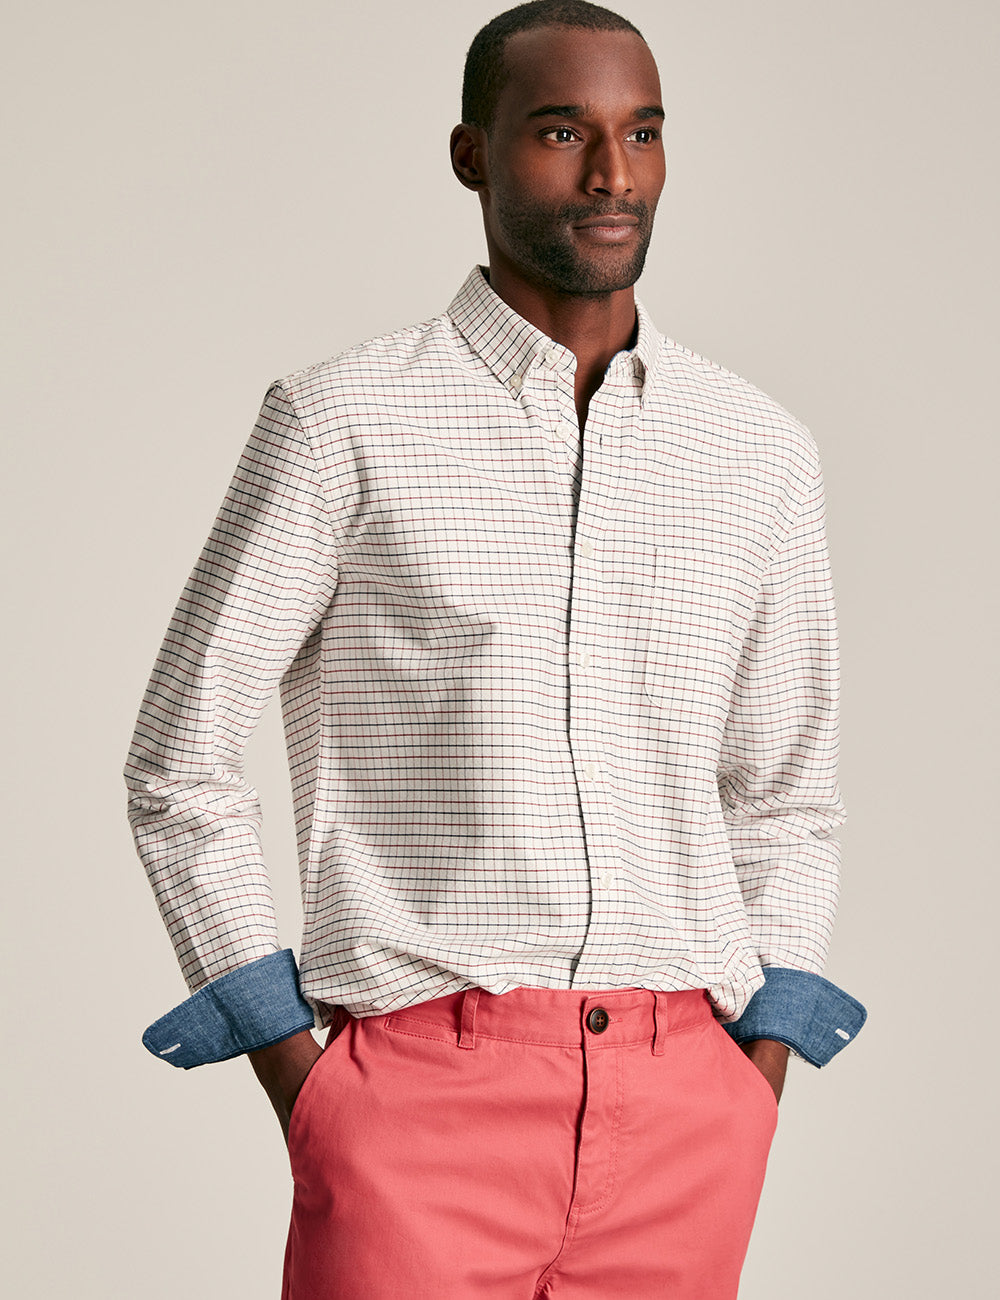 Joules Welford Shirt - Cream/Red Stripe